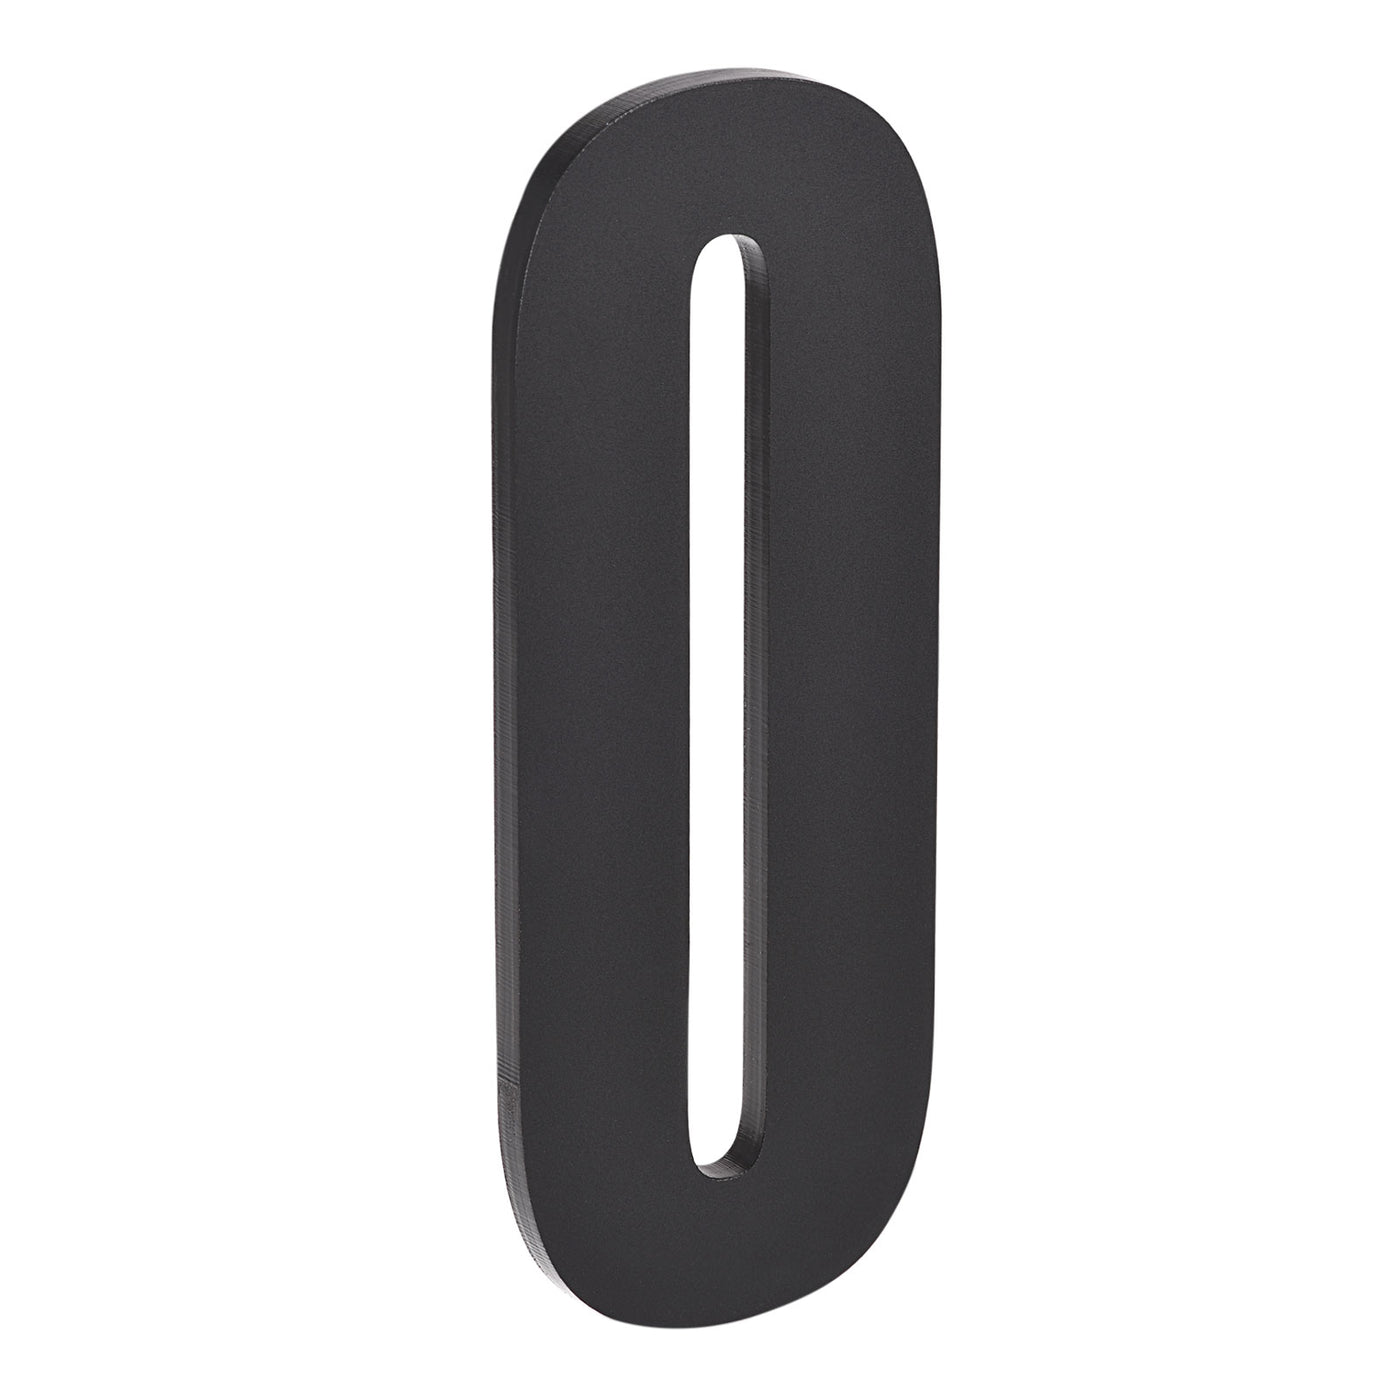 Uxcell Uxcell 4.72 Inch Self-Adhesive House Number for Hotel Mailbox Address, Black Number 5